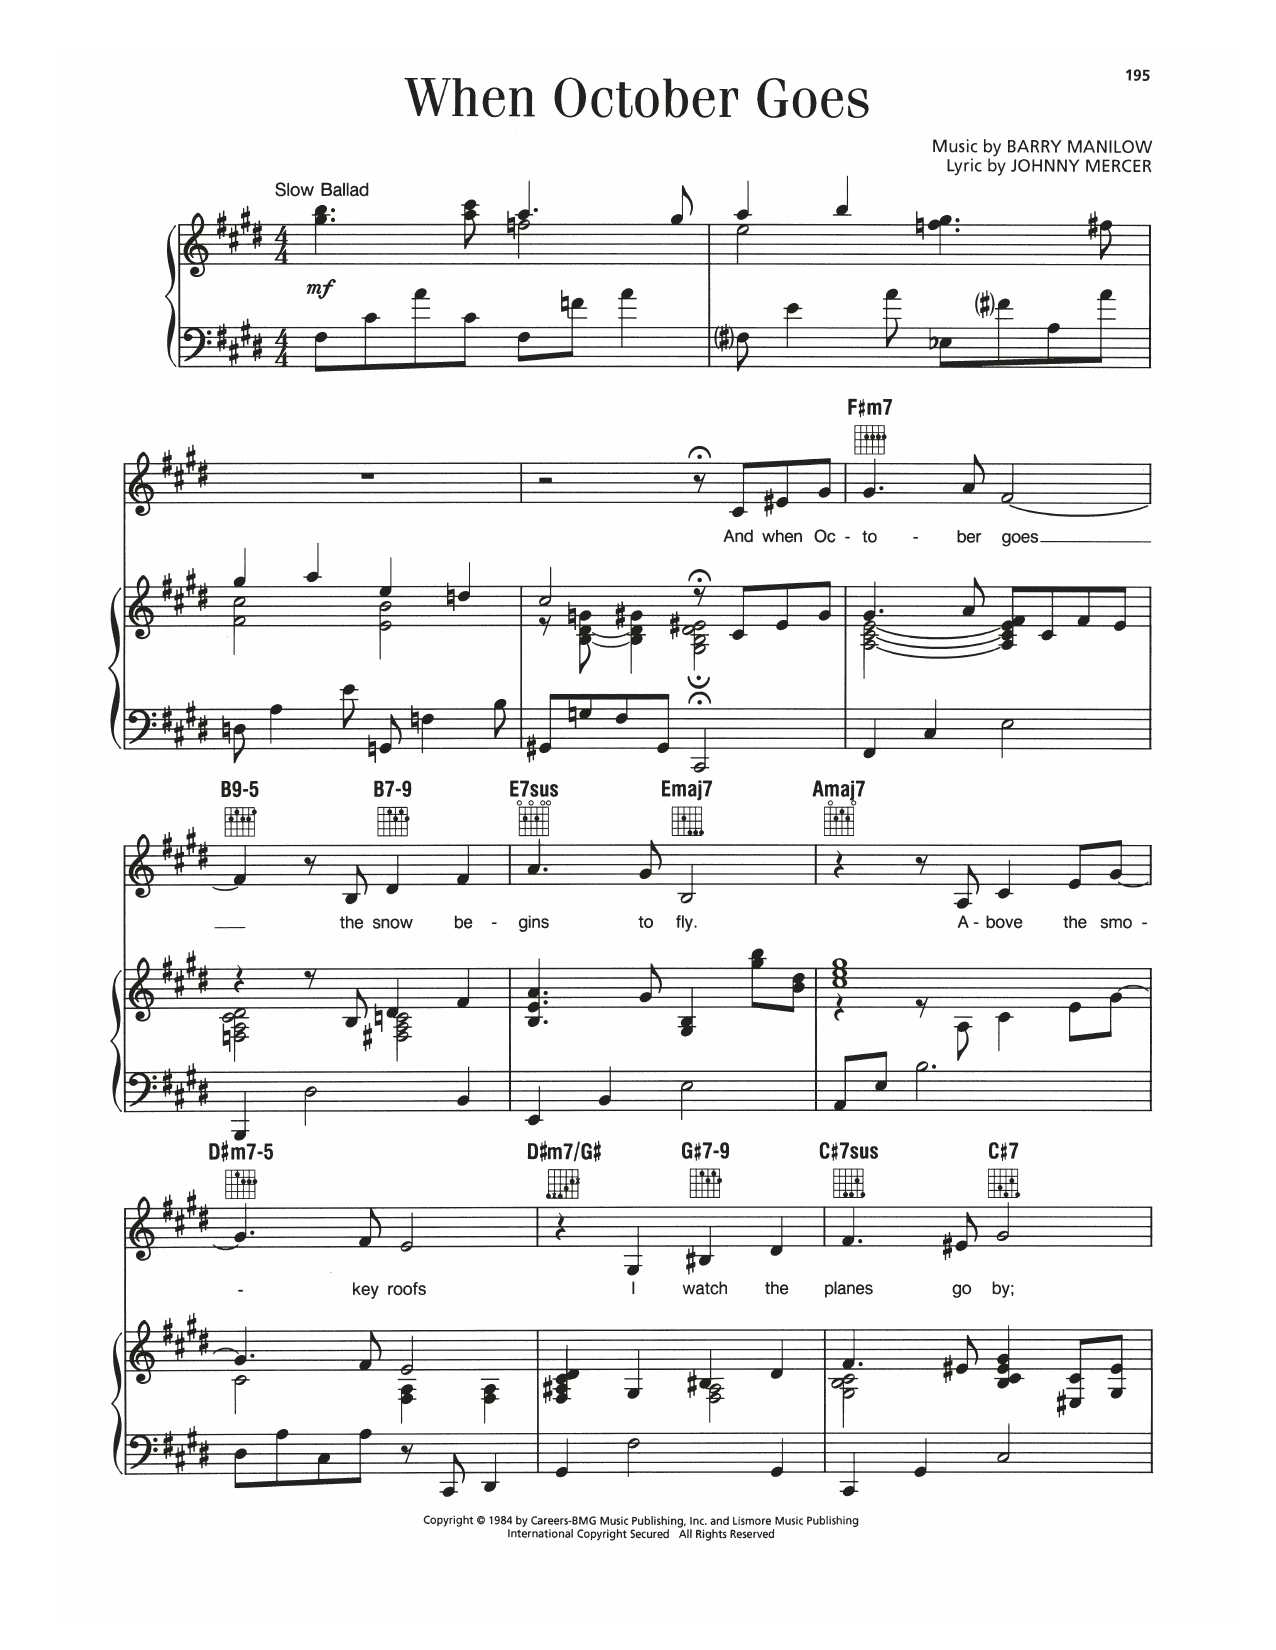 Barry Manilow When October Goes sheet music notes and chords. Download Printable PDF.